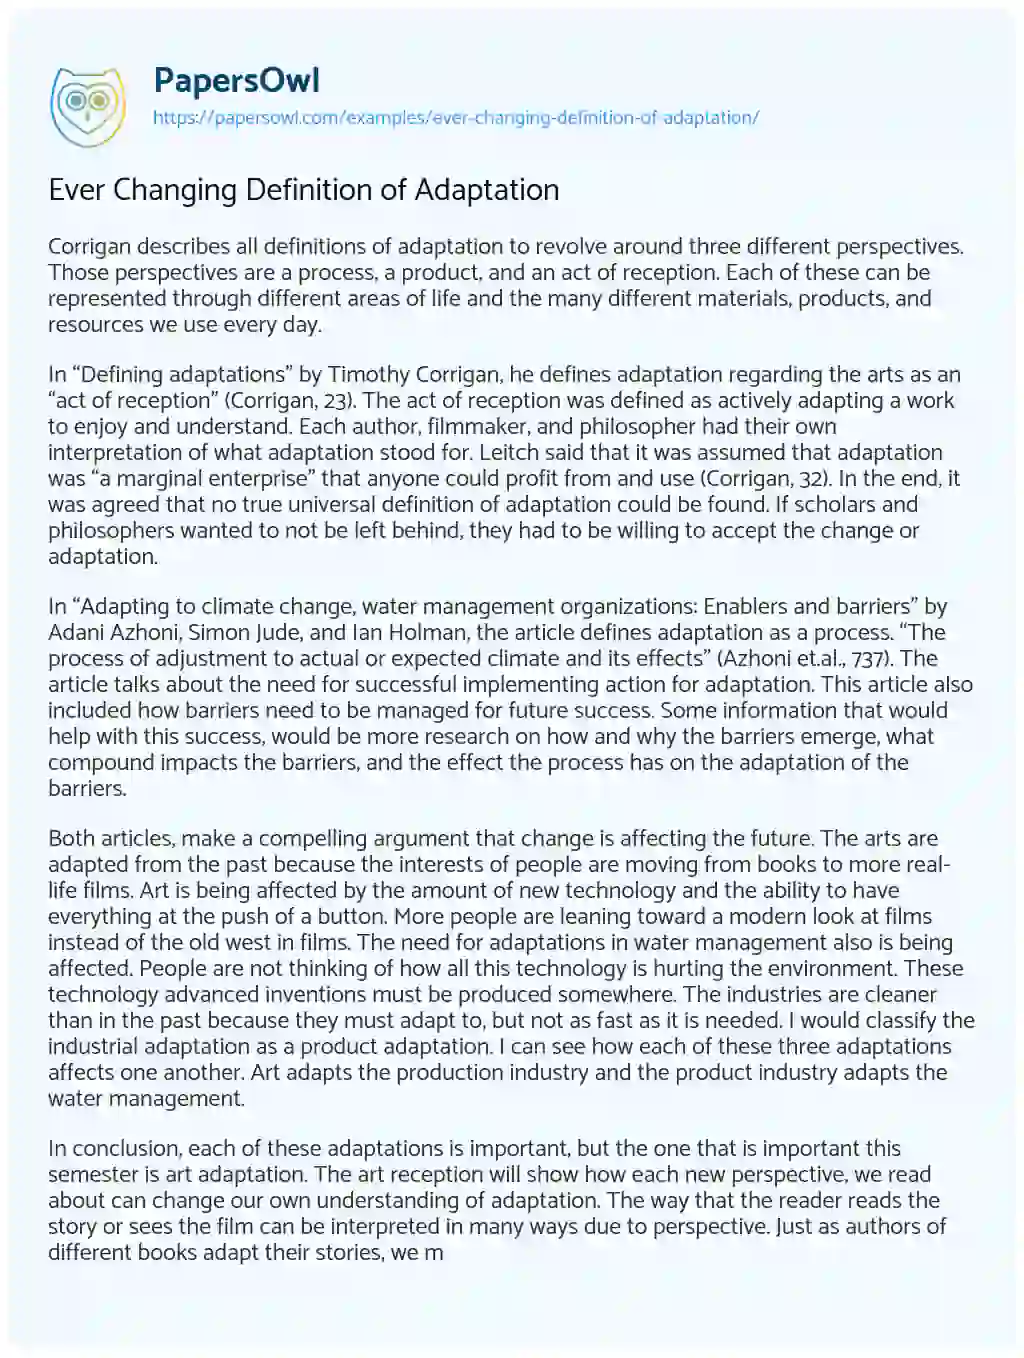 Essay on Ever Changing Definition of Adaptation